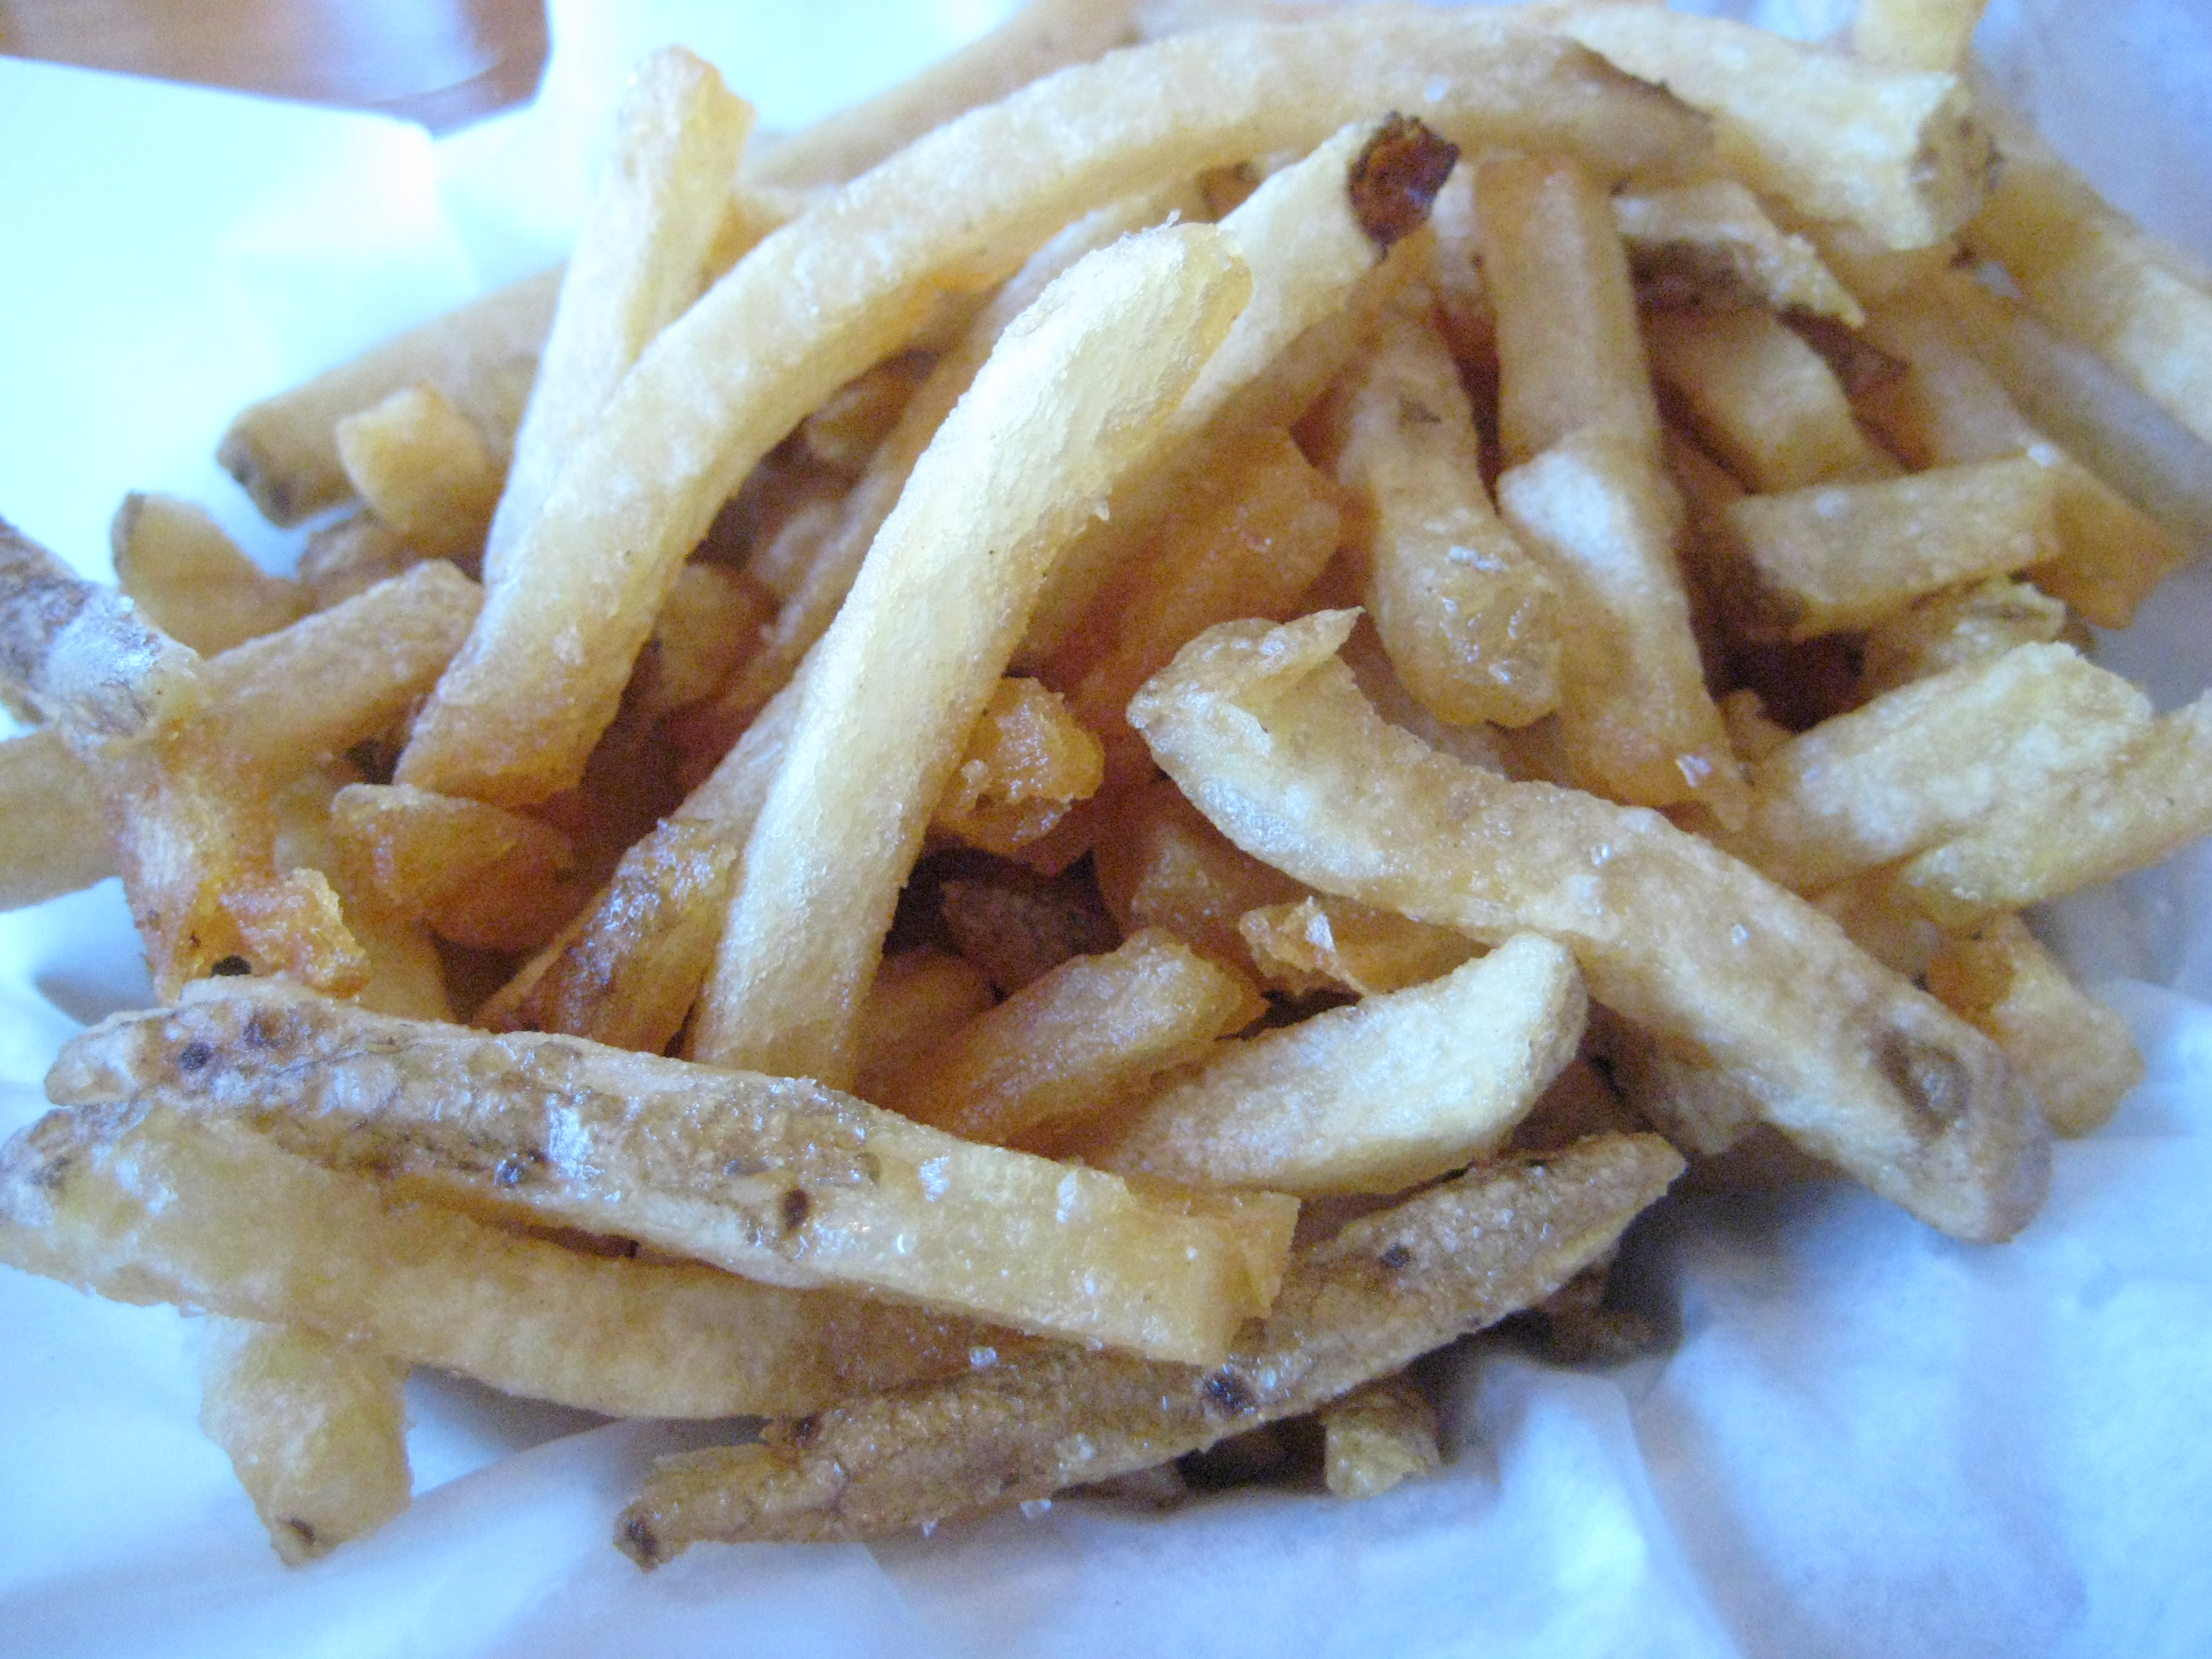 Fries cooked in LARD.  Crunchy, but potato flavor lost in the pork fat.  